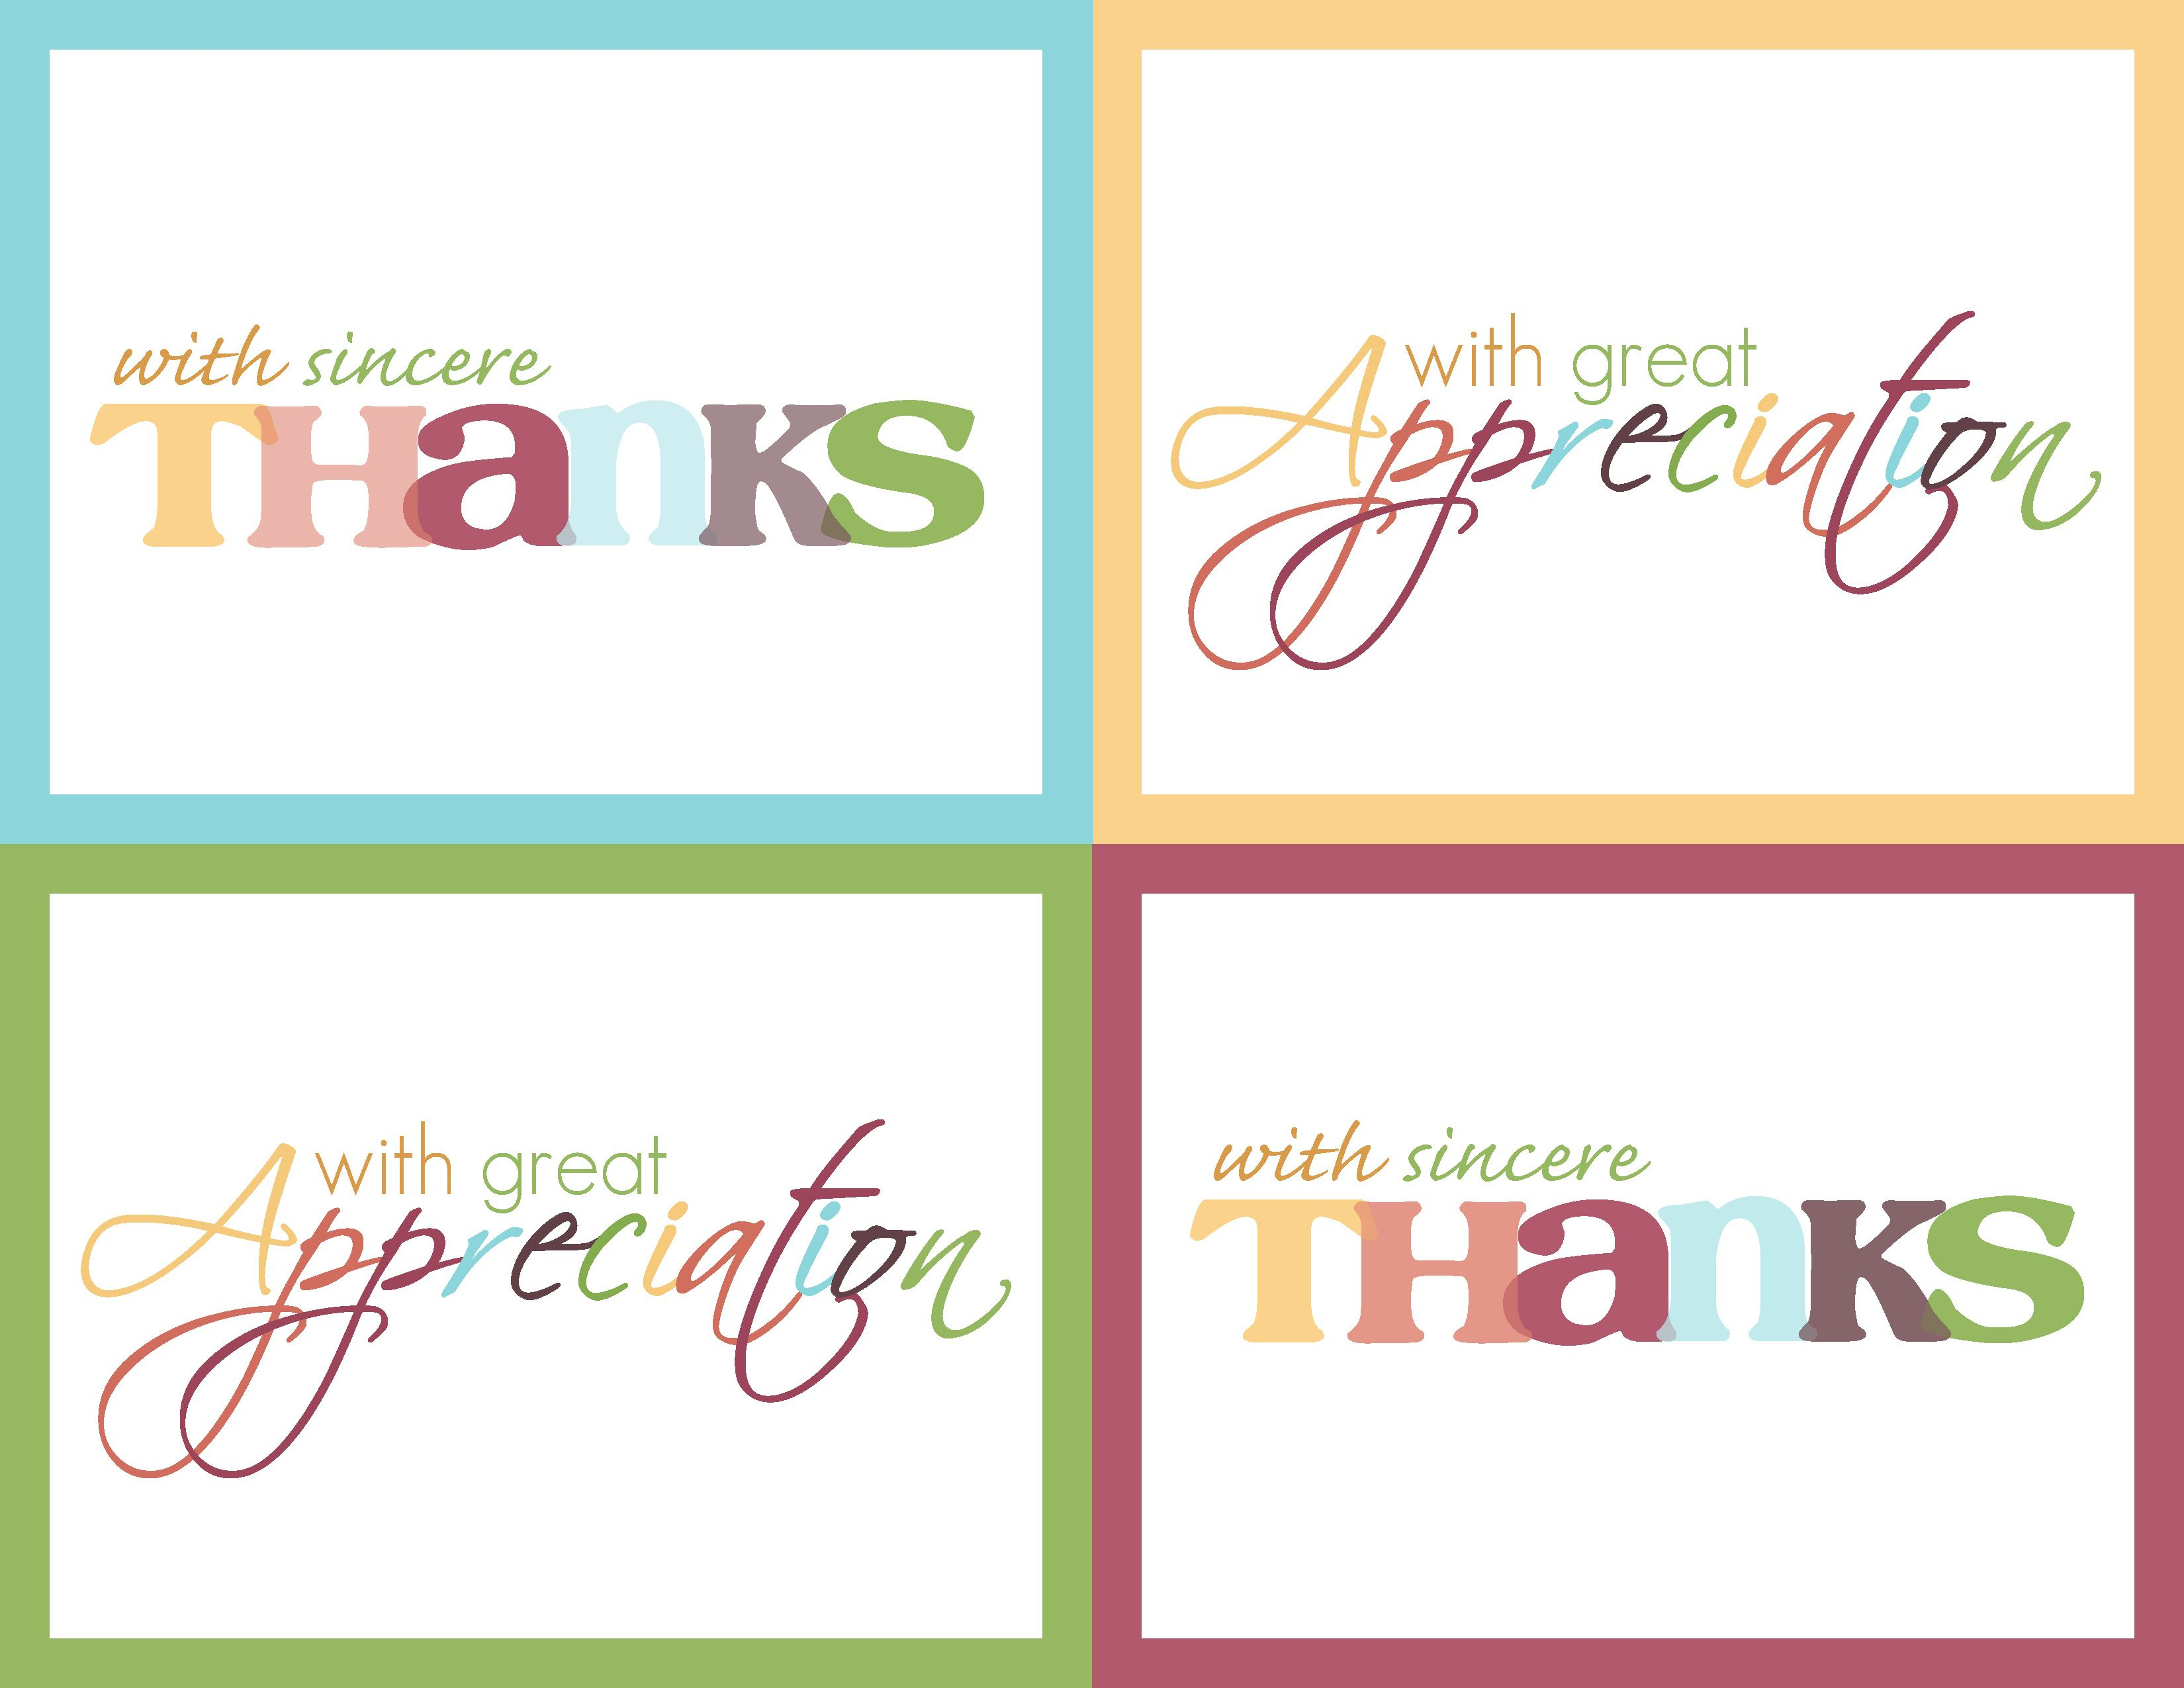 Just In Time For Thanksgiving! Get Your {Free} Thank-You Cards - Free Personalized Thank You Cards Printable